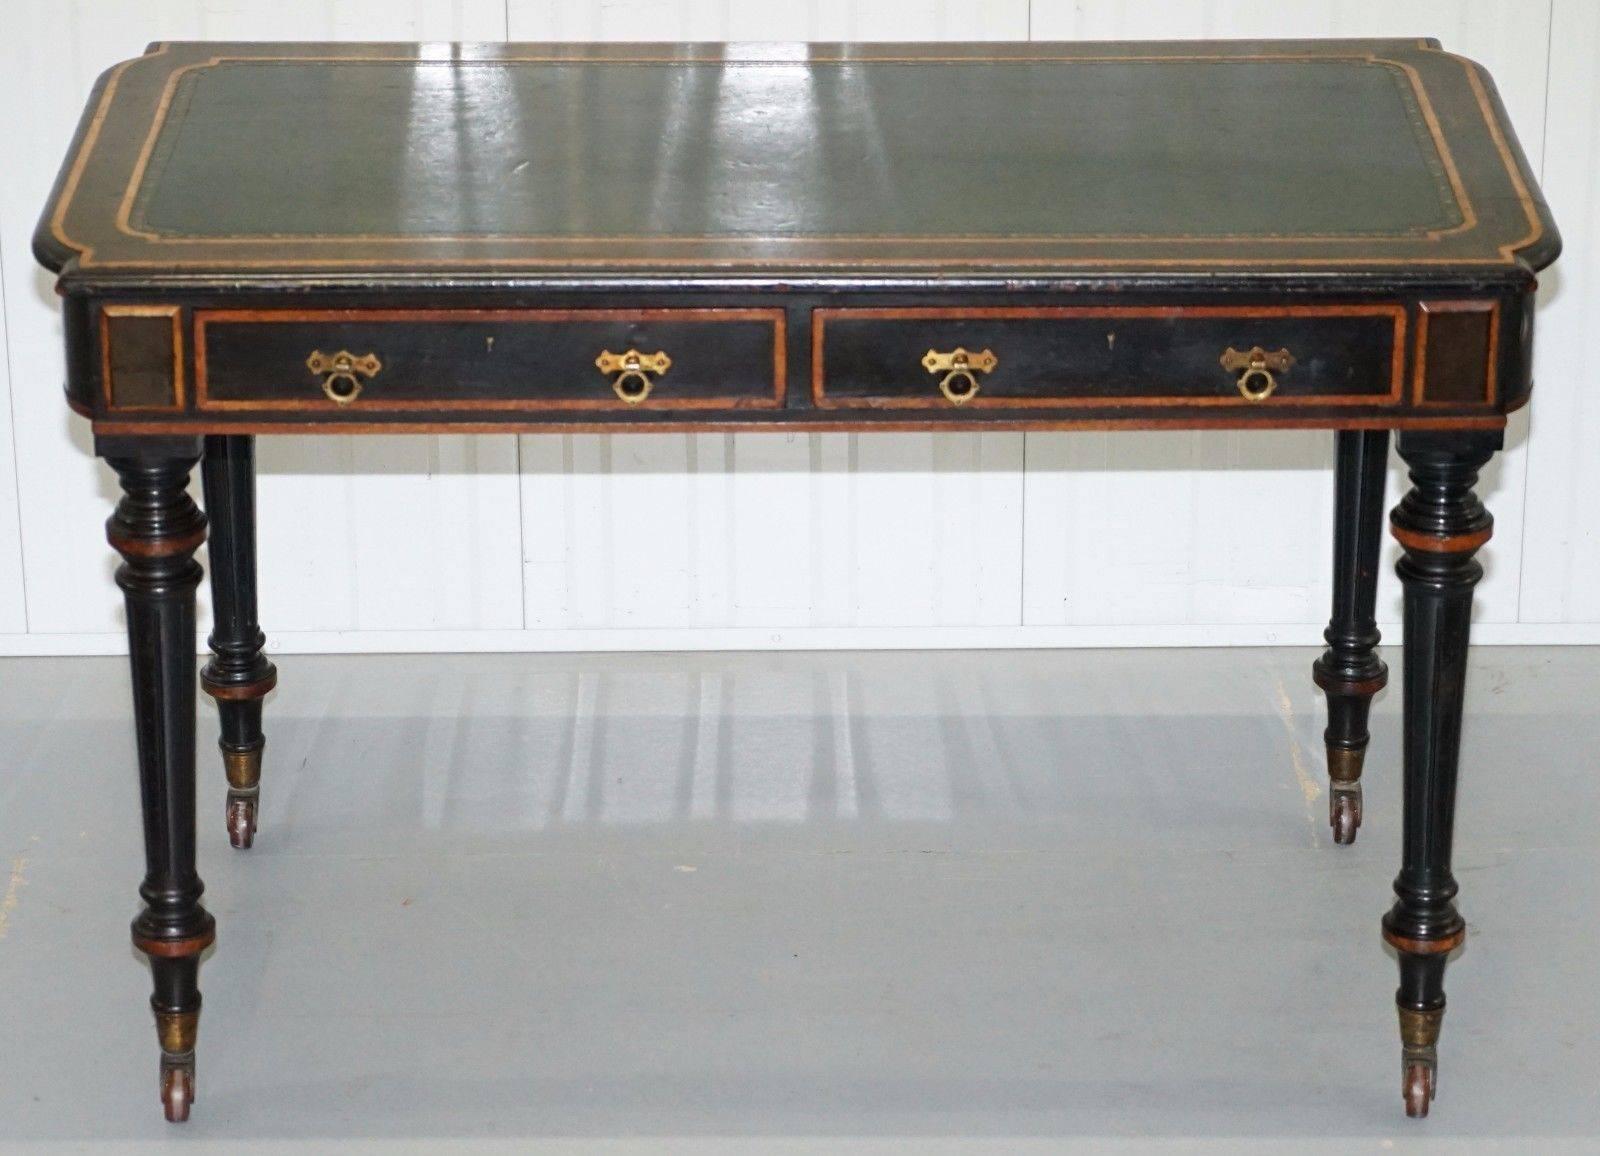 Wimbledon-Furniture

Wimbledon-Furniture is delighted to offer for sale this lovely original circa 1860 Edwards & Roberts ebonised and Walnut writing table desk

Please note the delivery fee listed is just a guide, for an accurate quote please